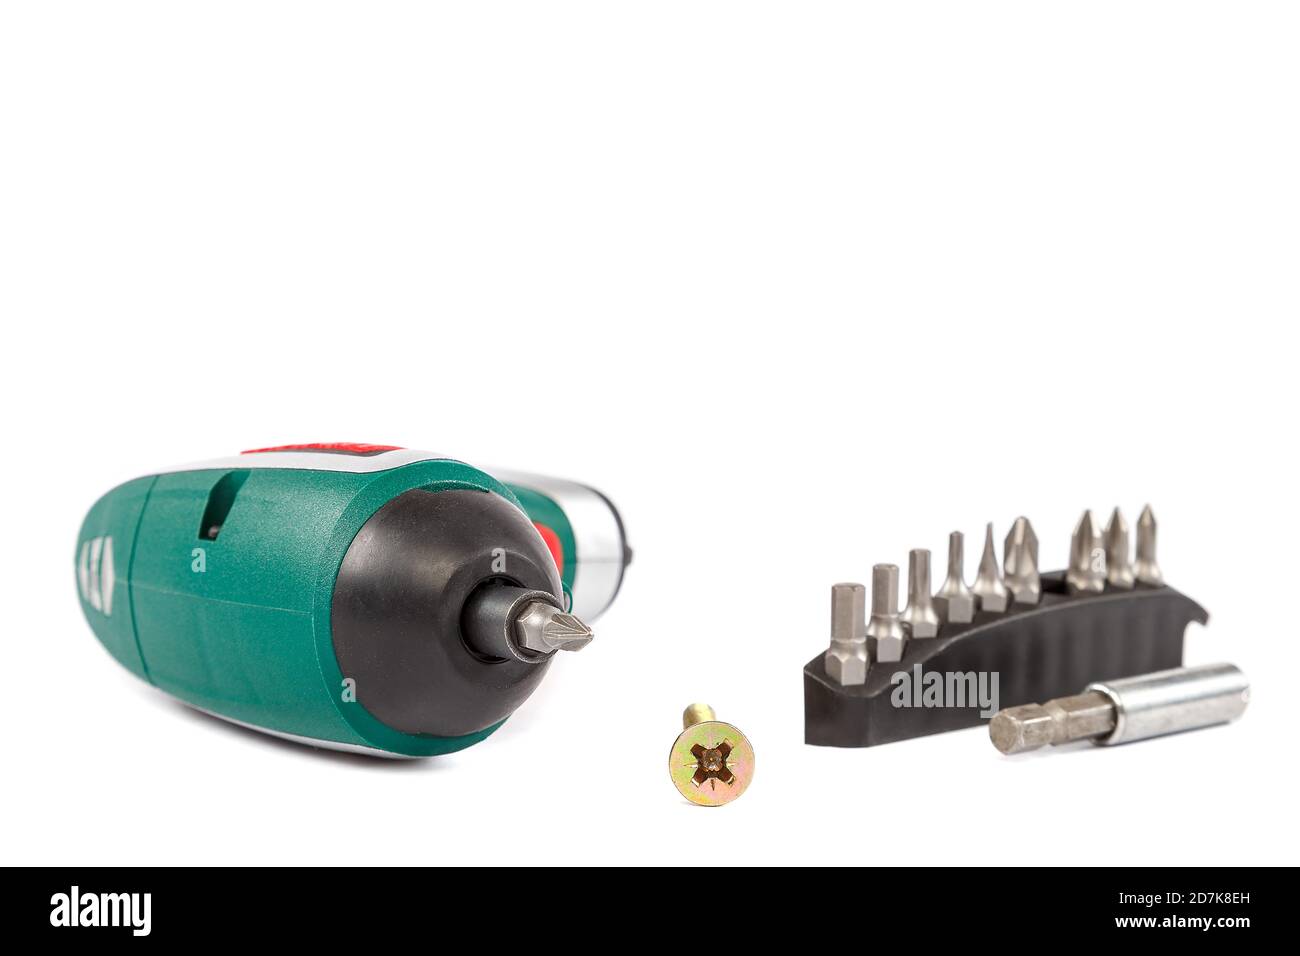 Winneconne, WI - 5 May 2020: A package of Bosch IXO screwdriver on an  isolated background Stock Photo - Alamy